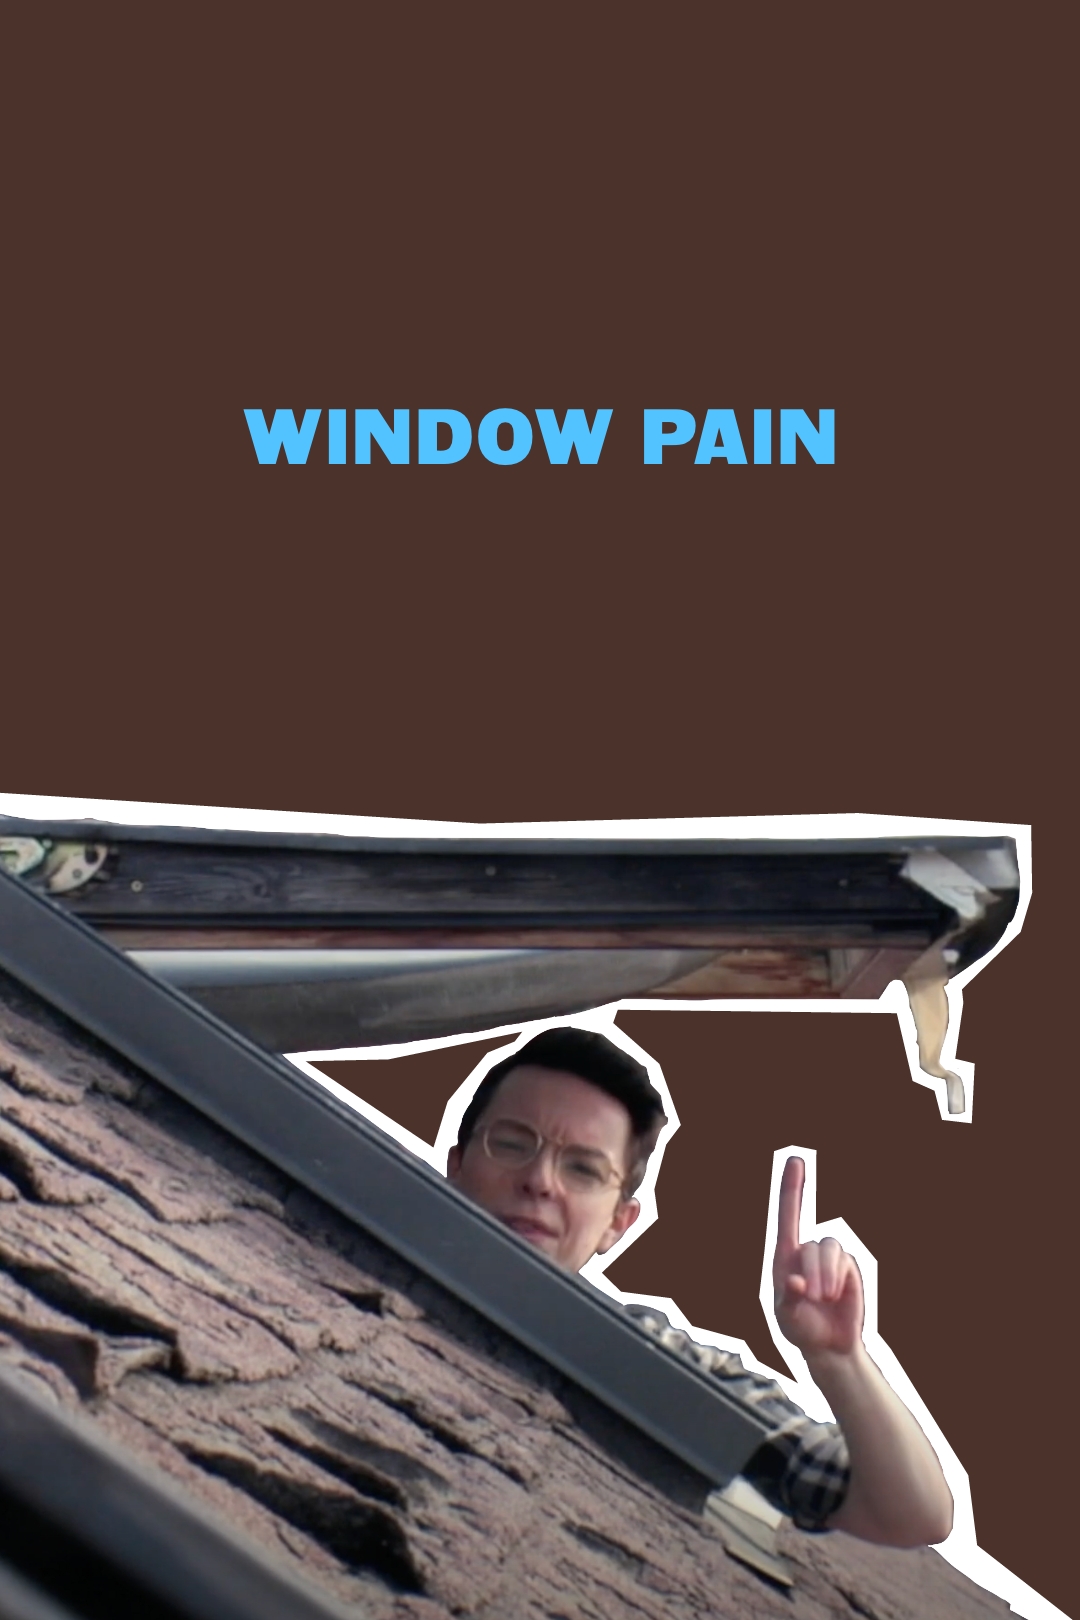 Poster for the film "Window Pain"